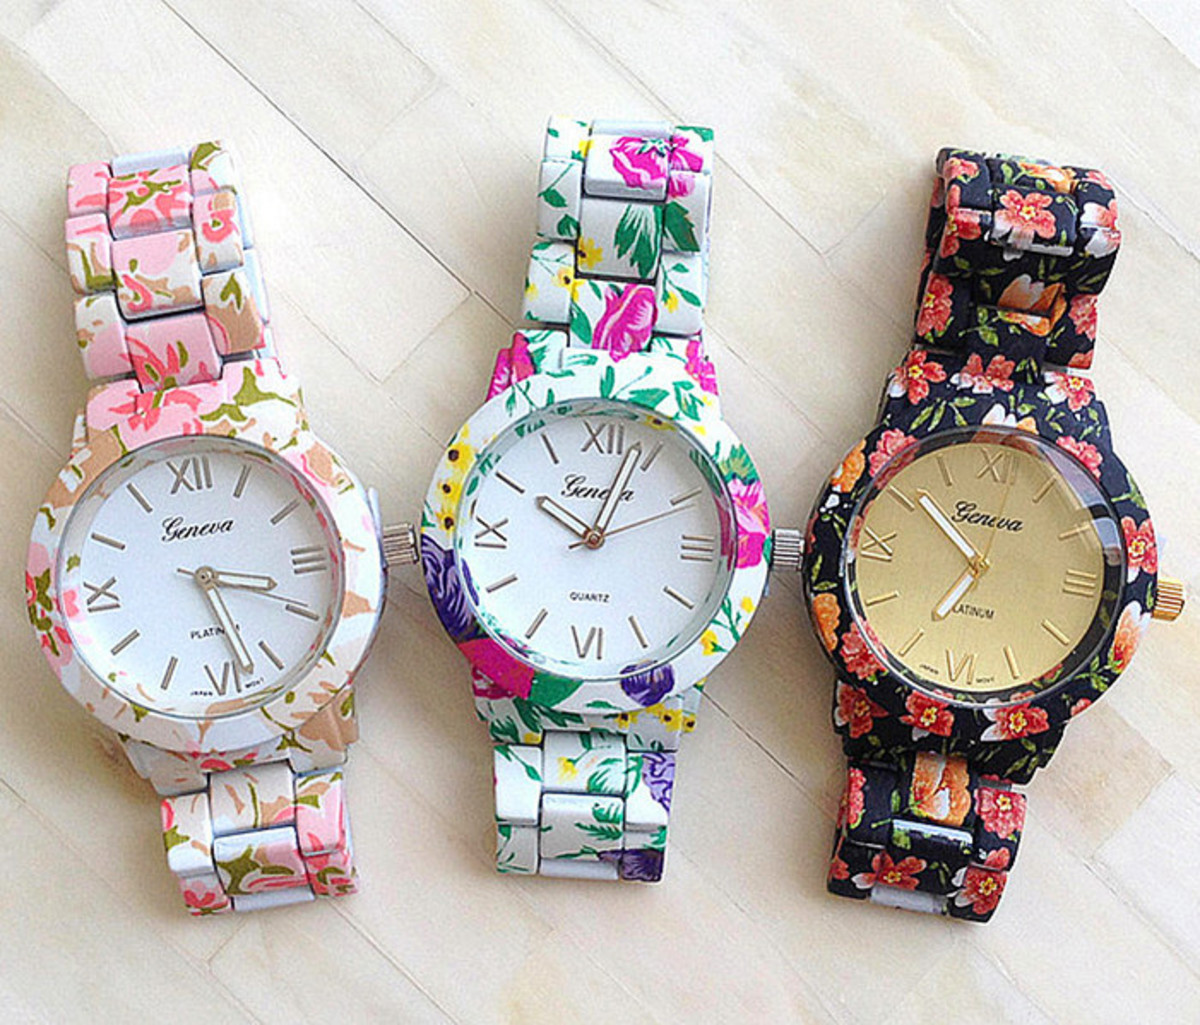 Cute floral-pattern watches are another good gift option for teen girls.